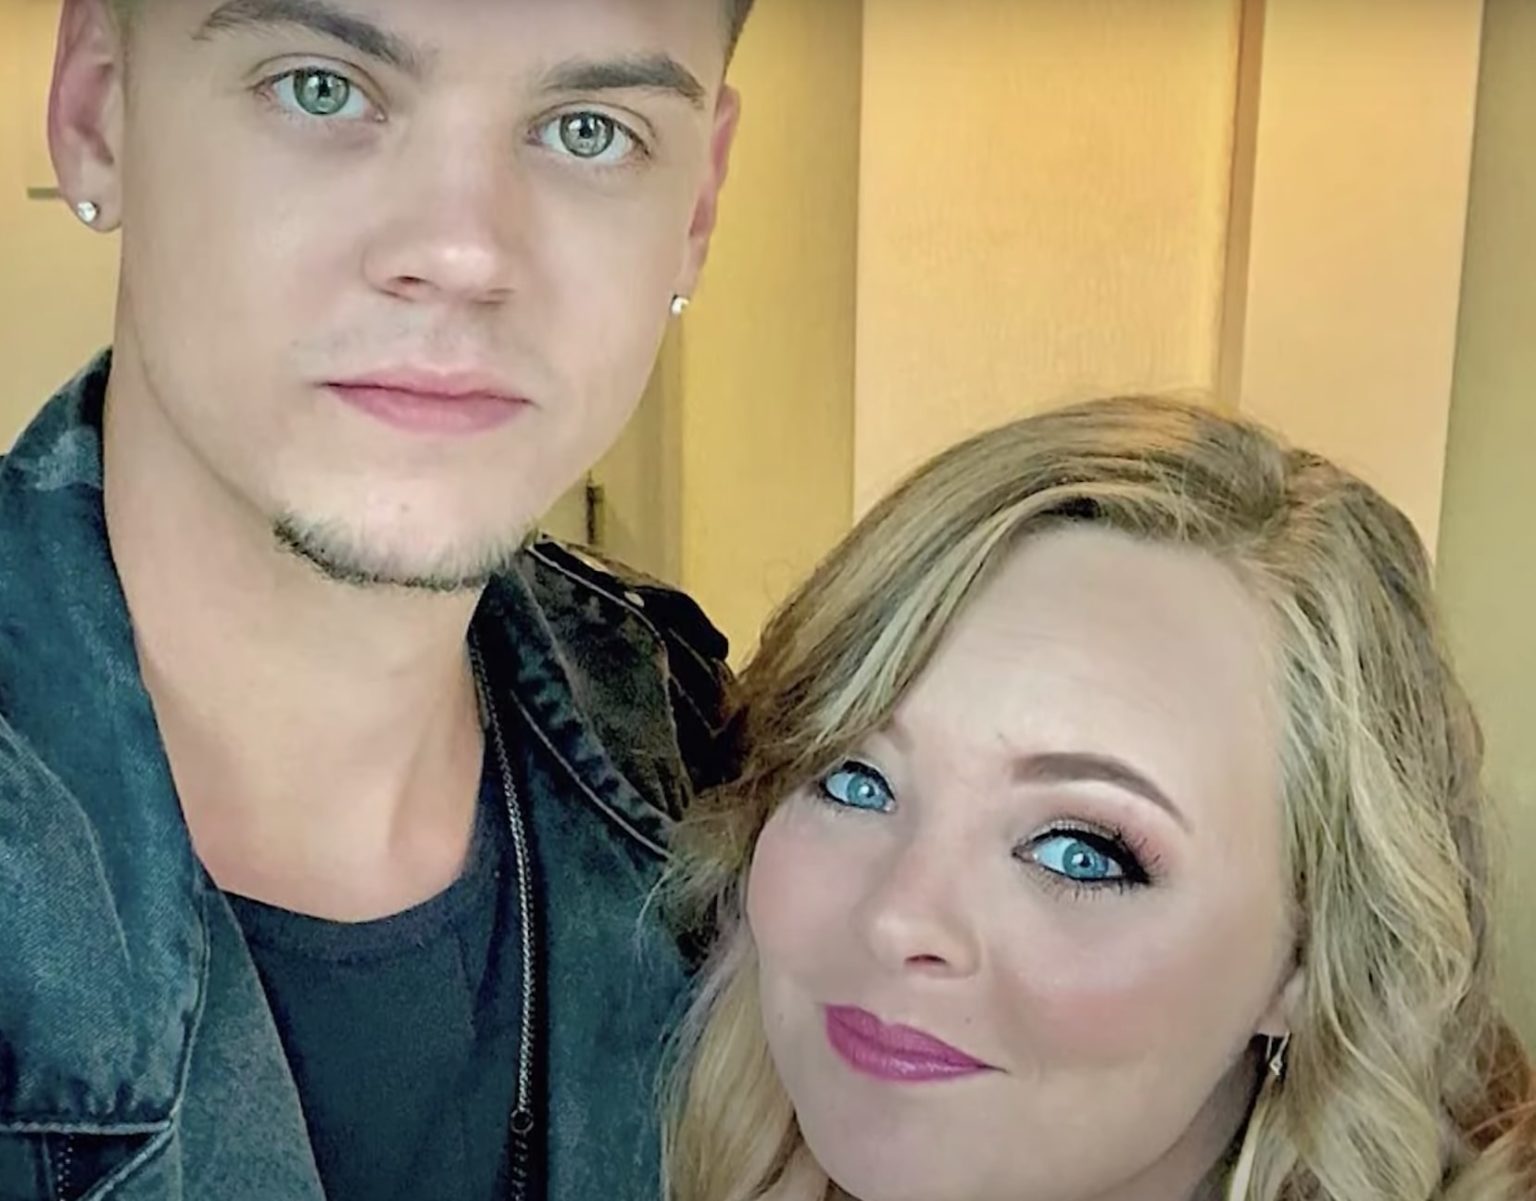 Teen Mom's Catelynn Lowell Pregnant With Rainbow Baby!